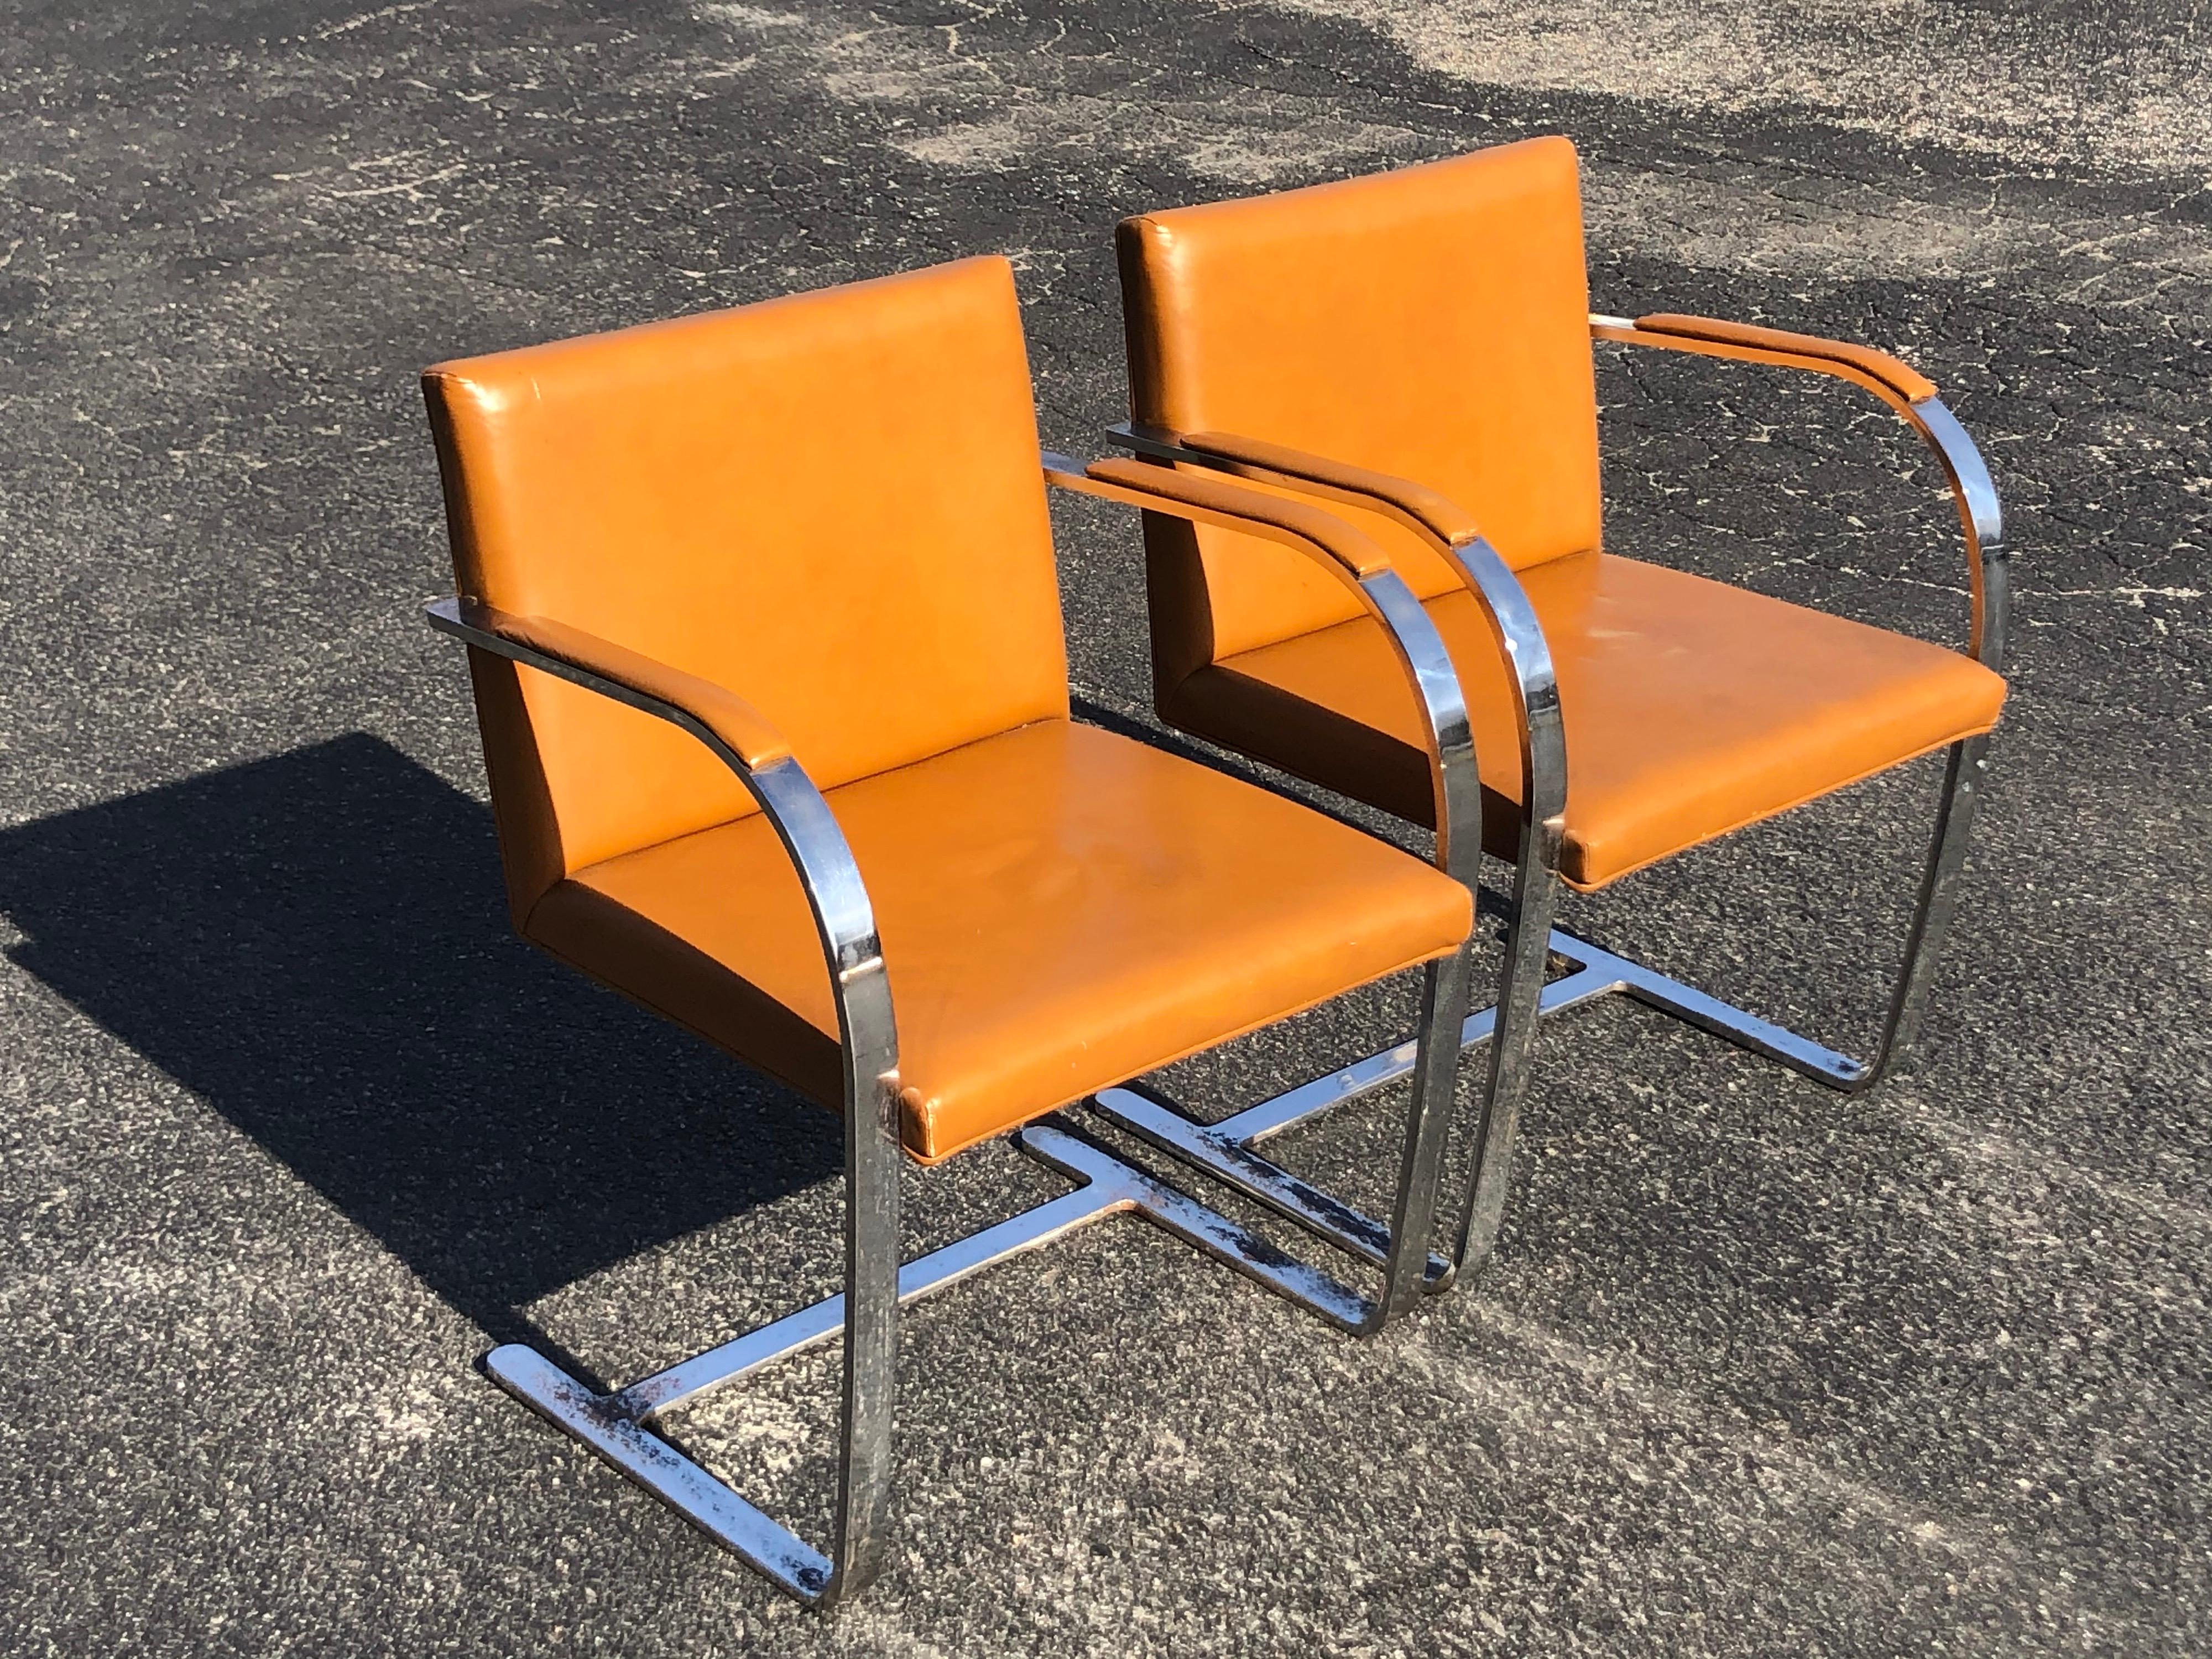 Pair of Flat Bar Brno chairs in the Style of Mies Van Der Rohe. Classic Knoll style Chrome cantilever chairs In caramel colored leather. No labels found but heavy chairs.